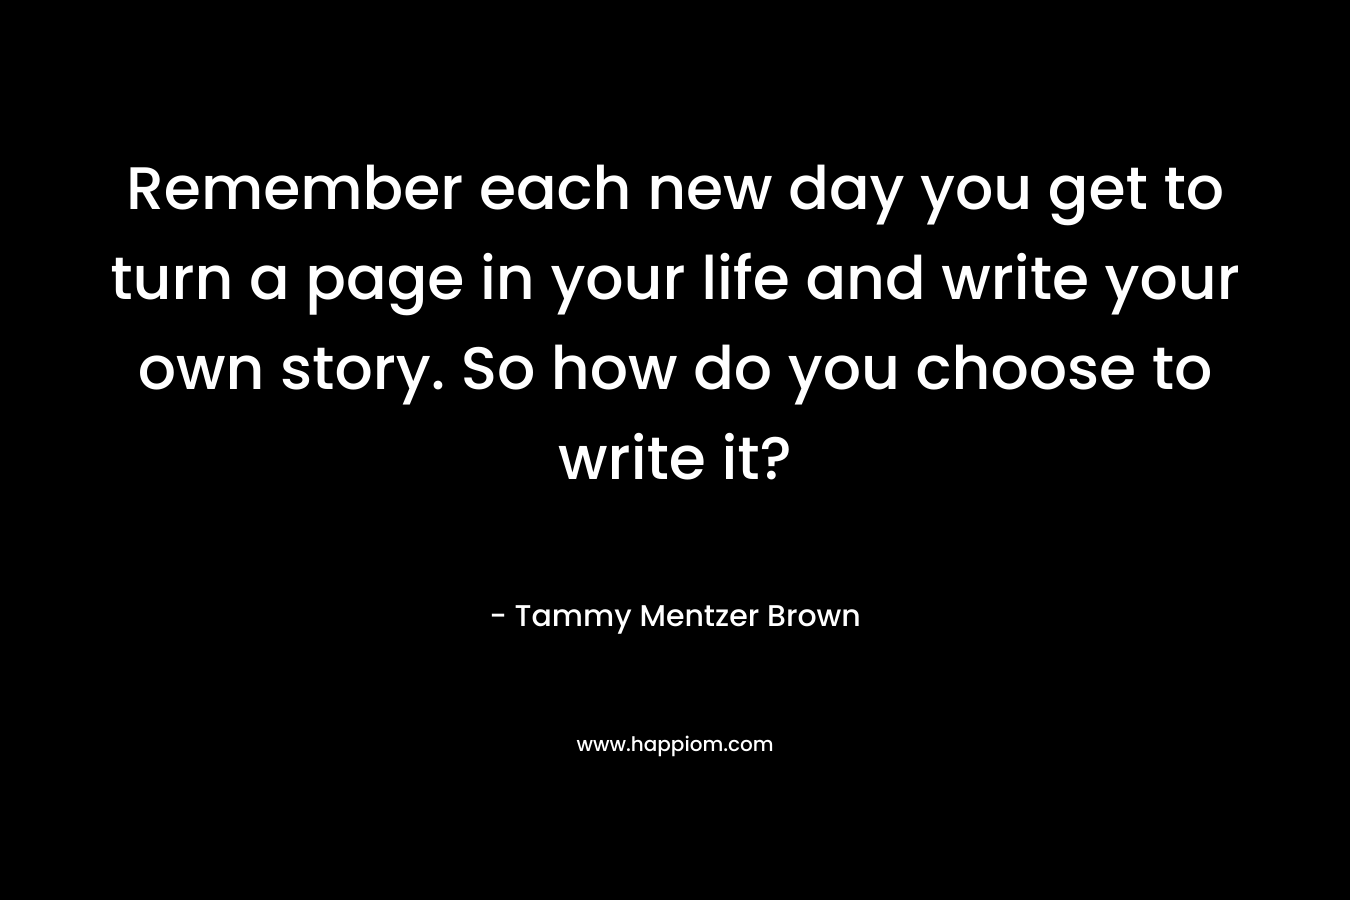 Remember each new day you get to turn a page in your life and write your own story. So how do you choose to write it?